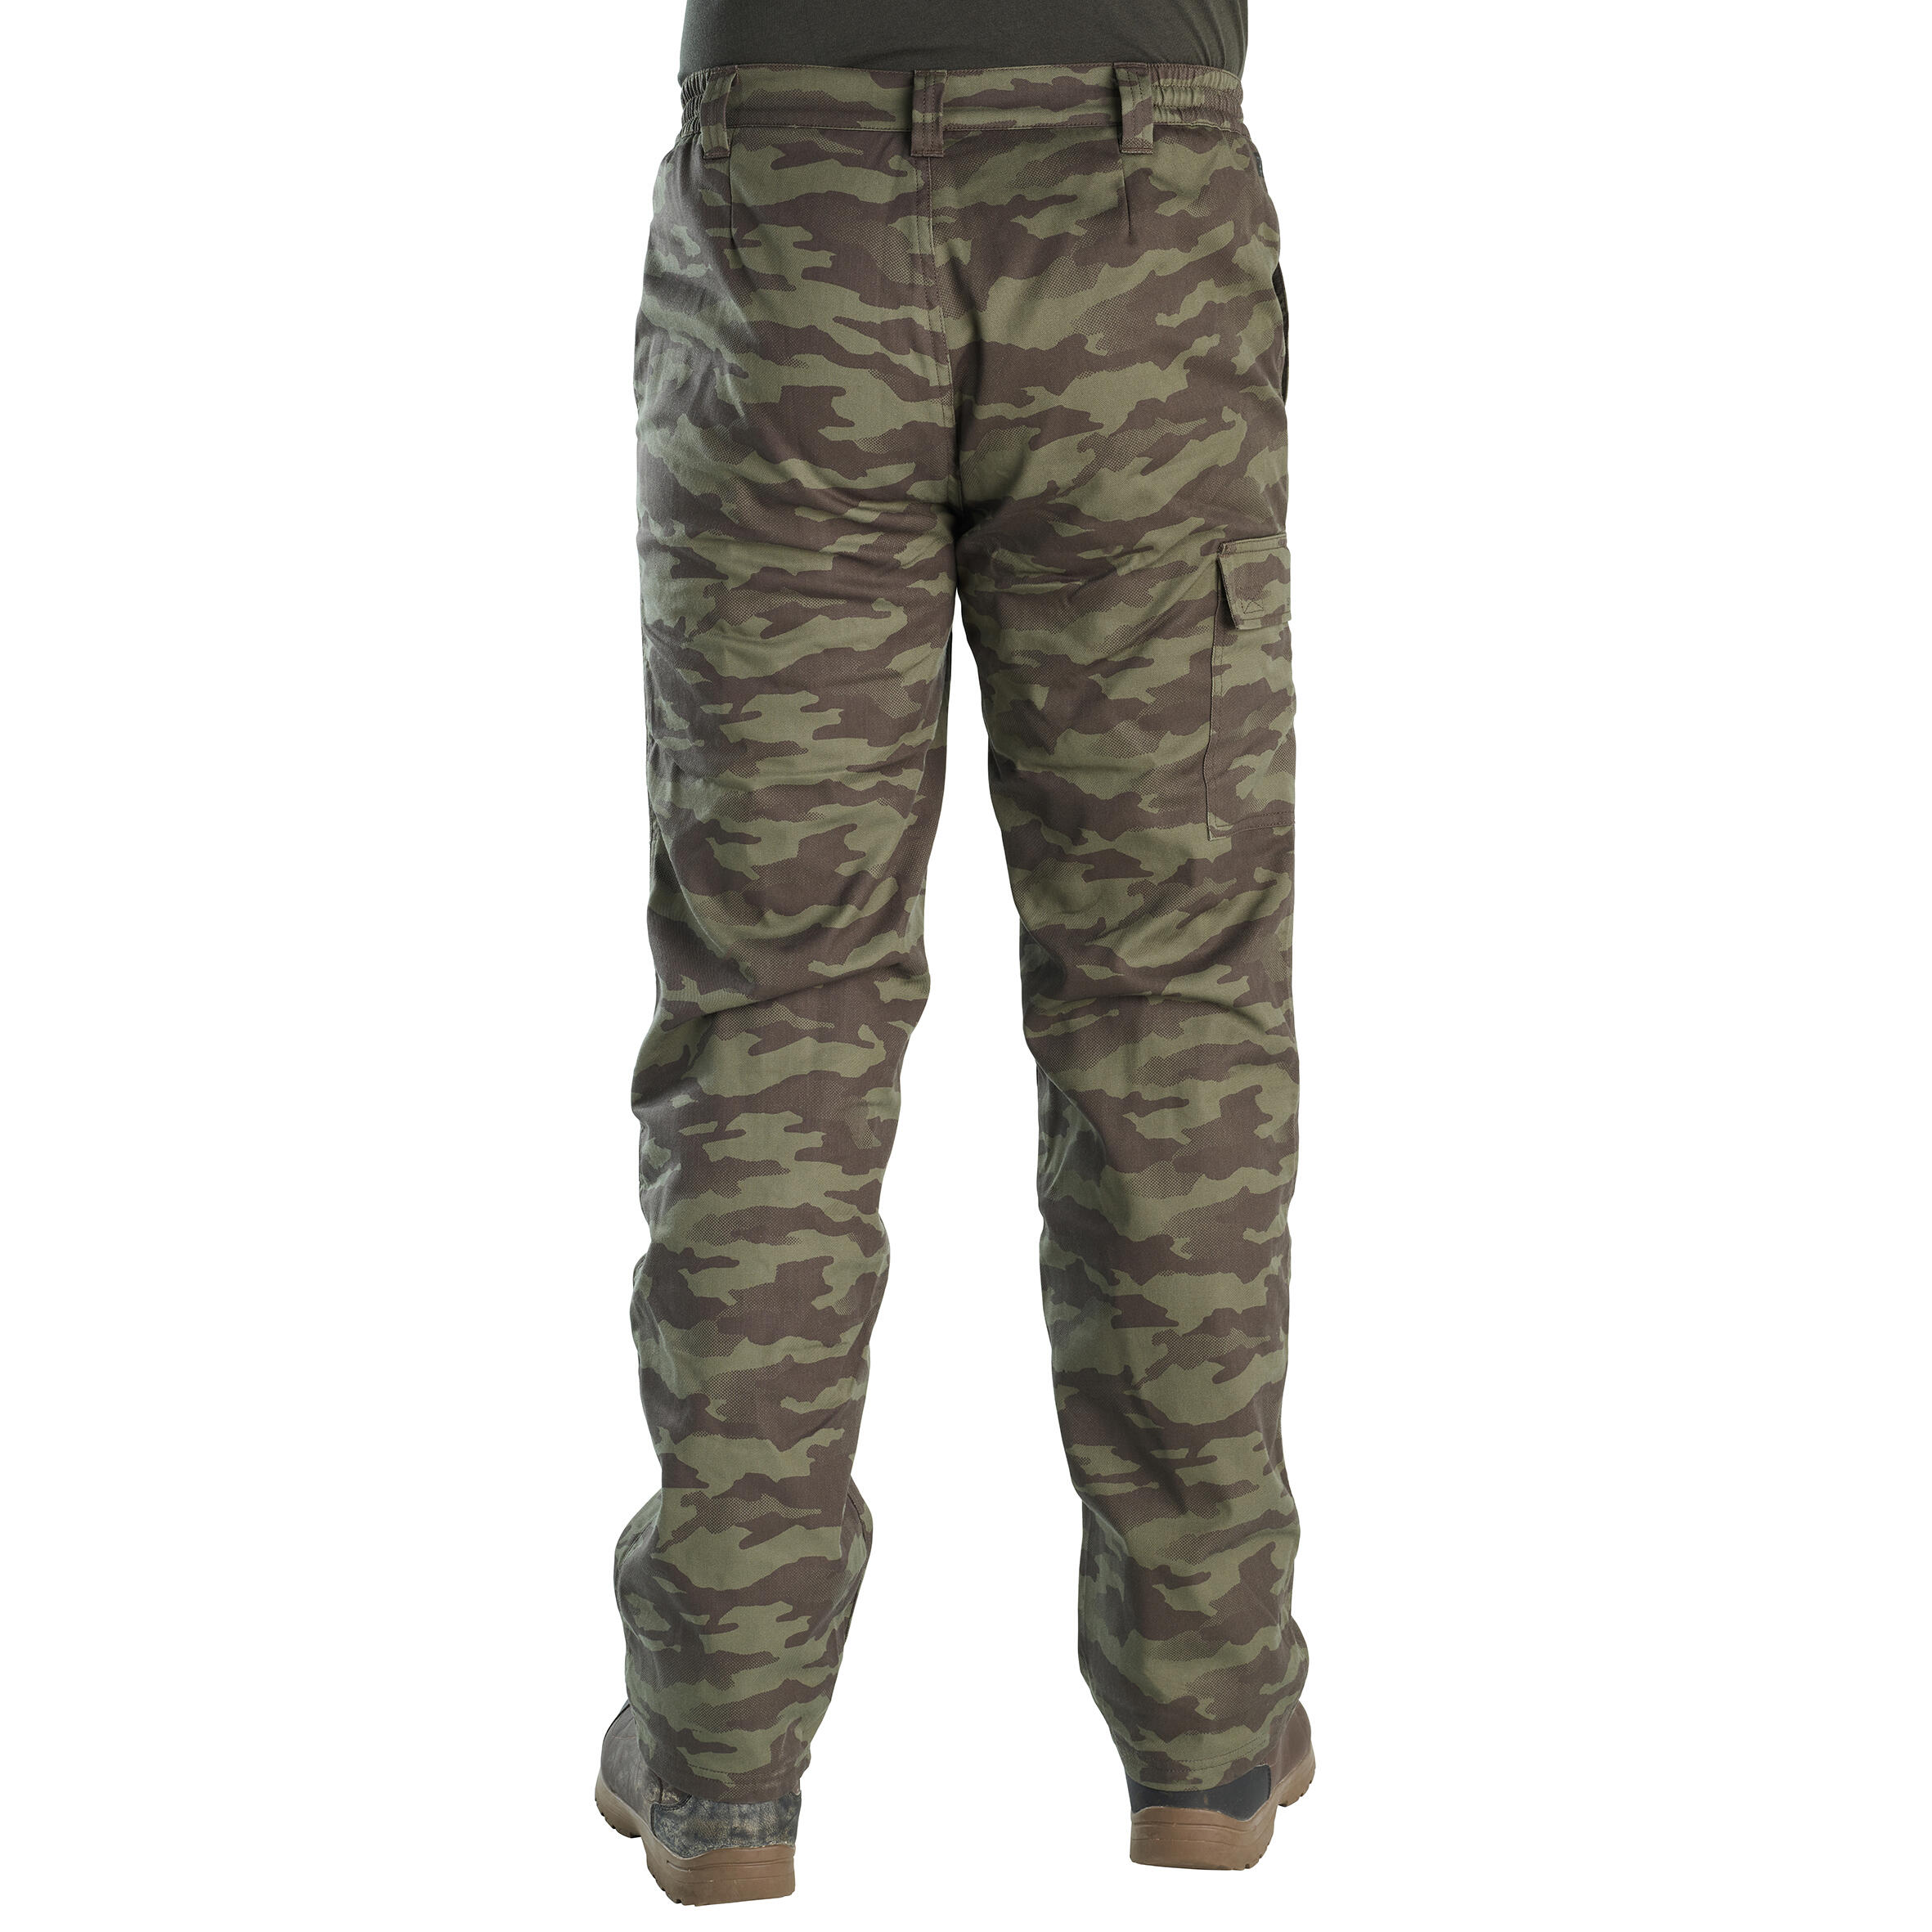 WARM HUNTING TROUSERS CAMOUFLAGE 100 5/10